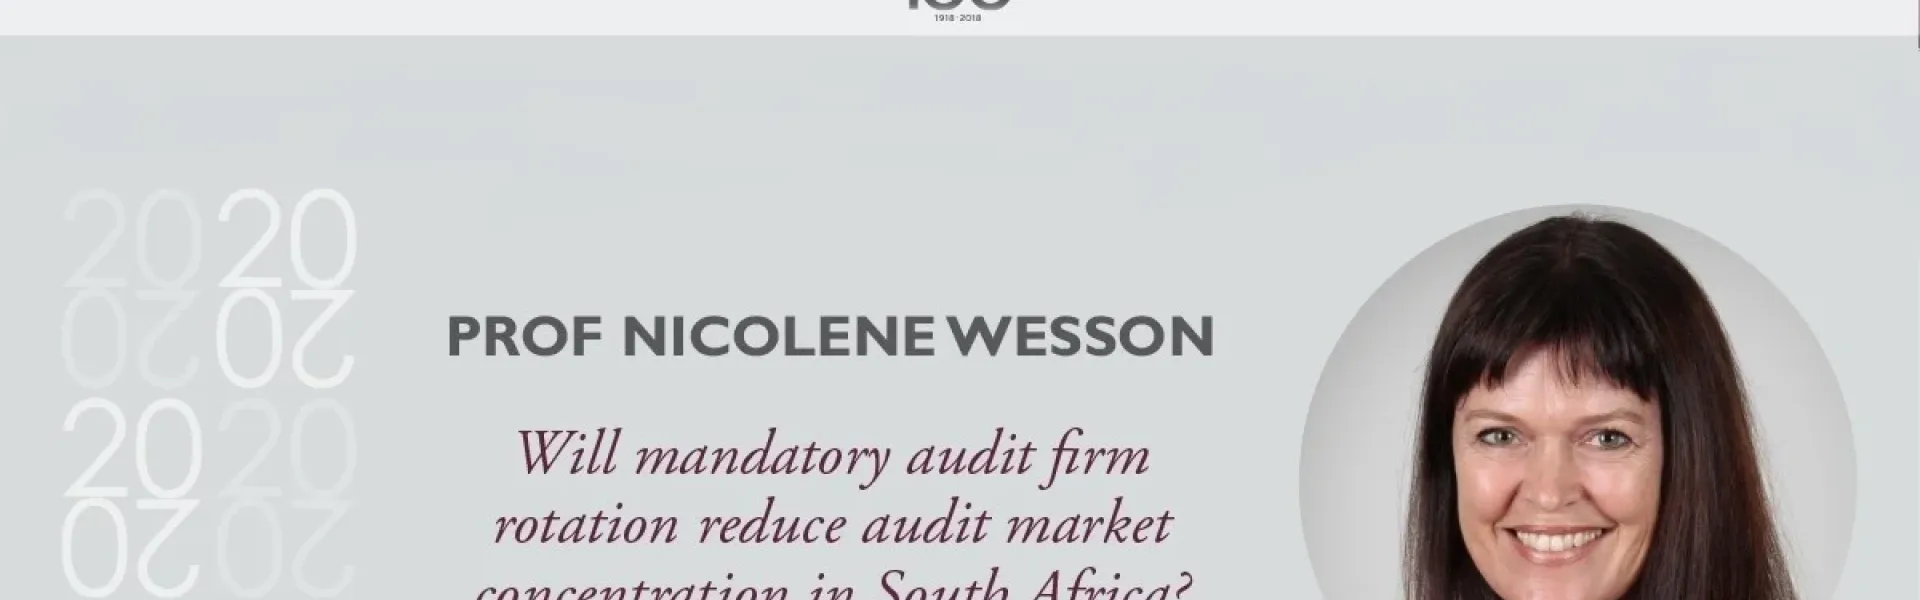 Will-mandatory-audit-firm-rotation-reduce-audit-market-concentration-in-South-Africa-Prof-Nicolene-Wesson-Virtual-Inaugural-Lecture